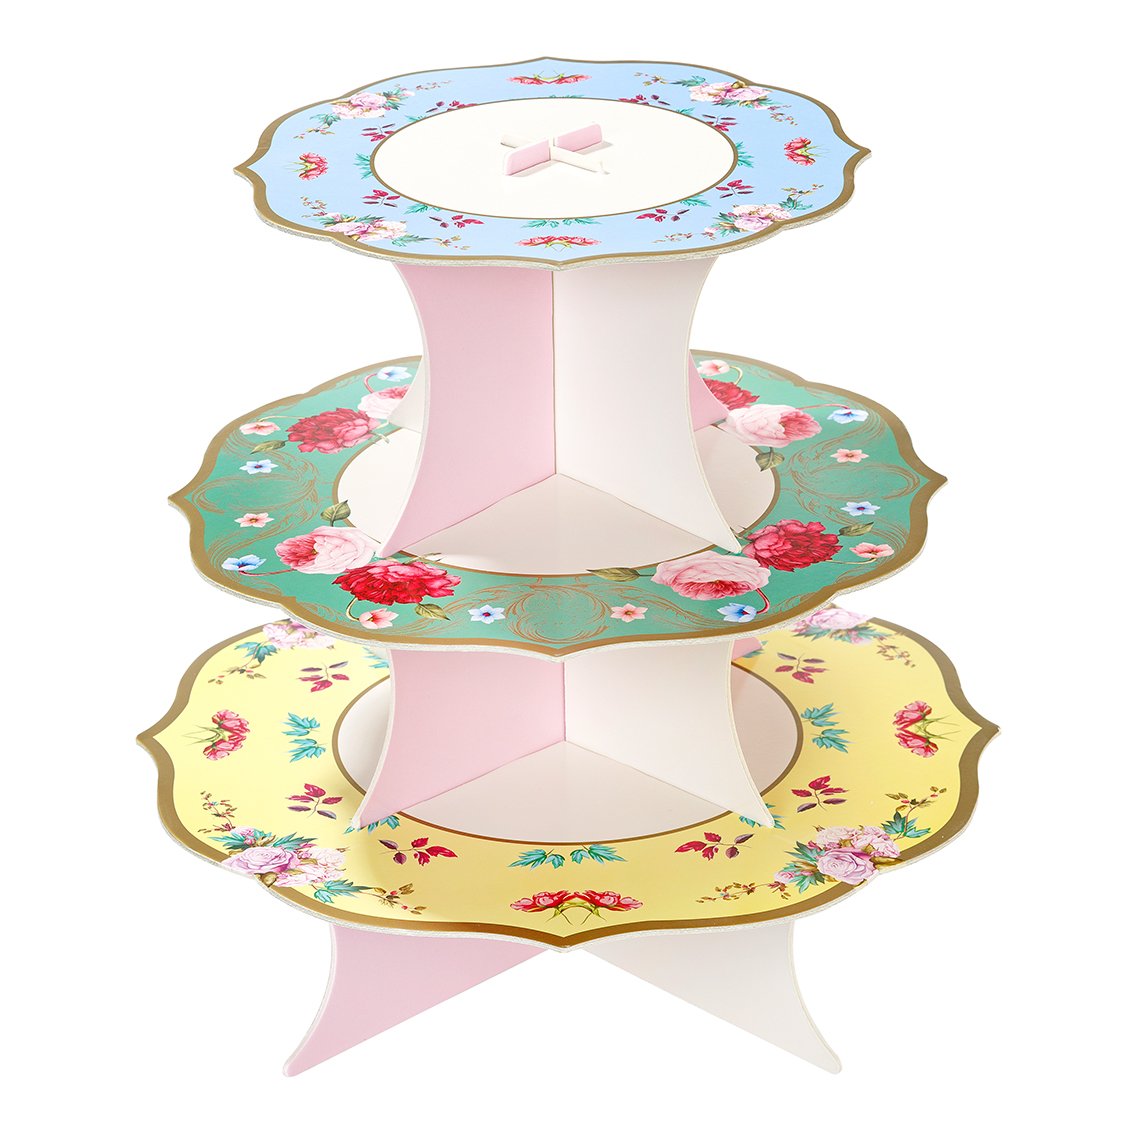 Truly Scrumptious 3 Tier Cake Stand